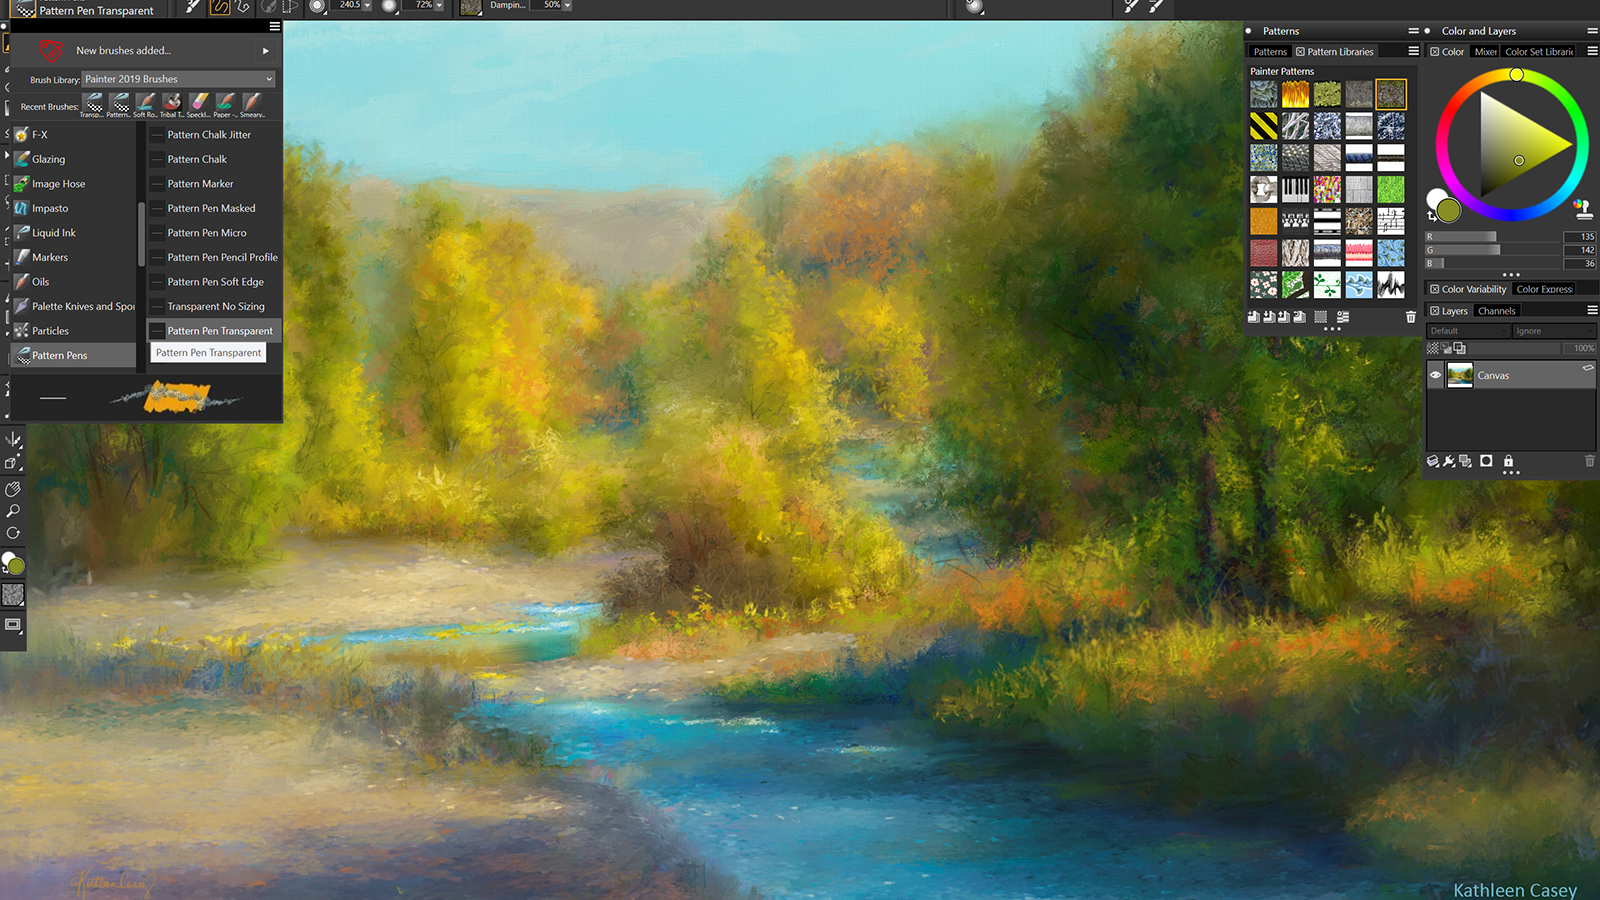 corel painter 2019 announced color  pattern pens and patterns photo workflow